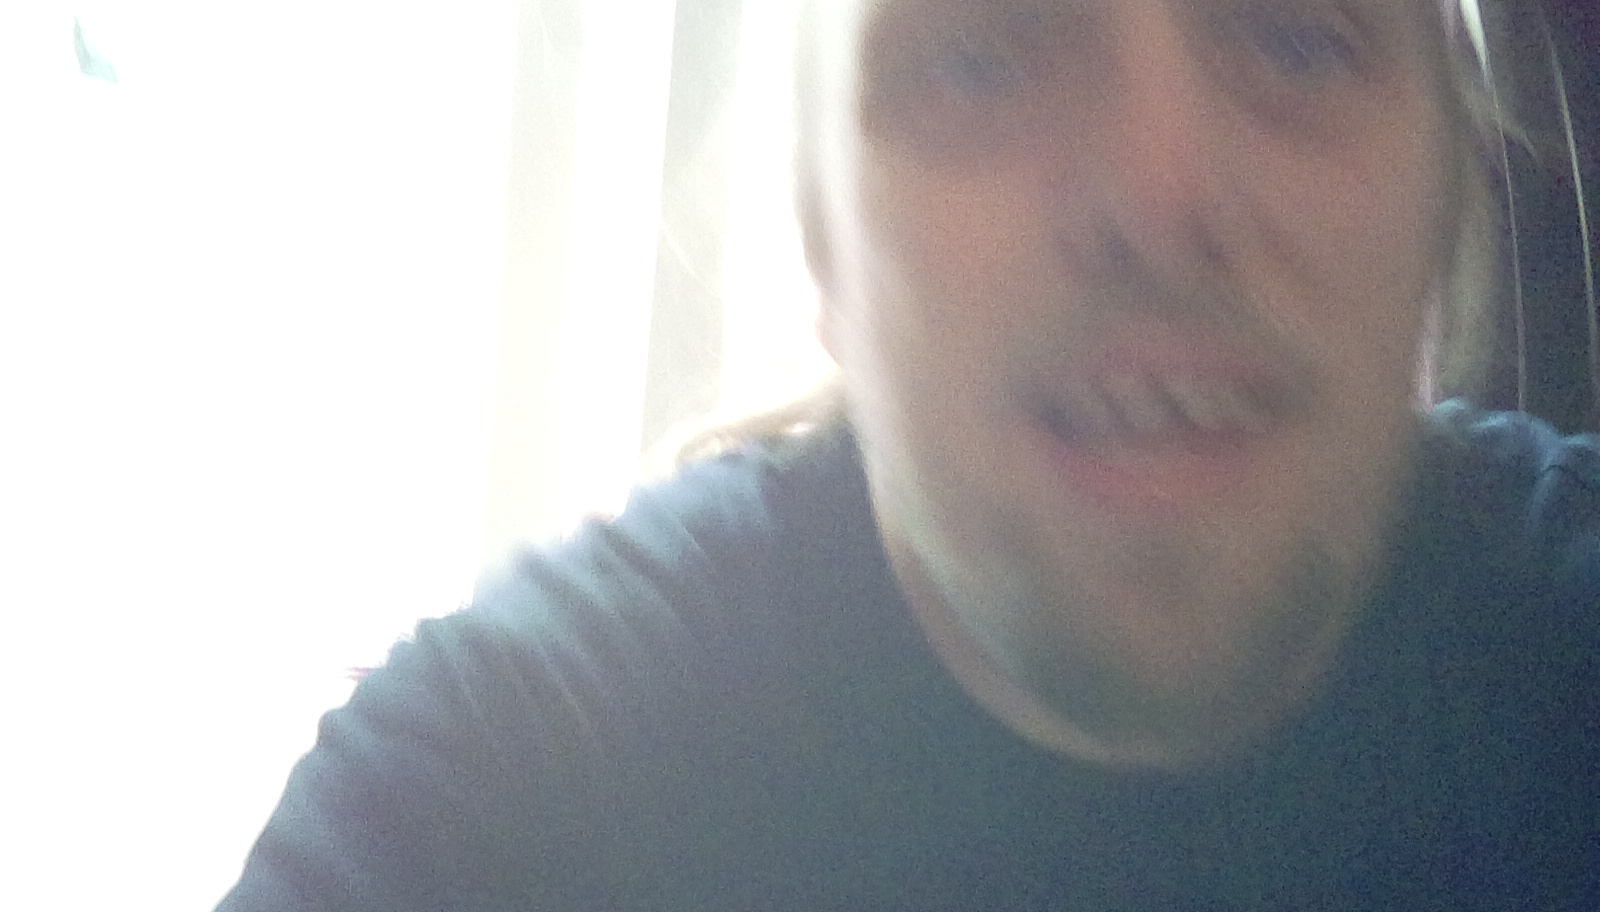 Extremely blurred close-up photo of Dan's face.